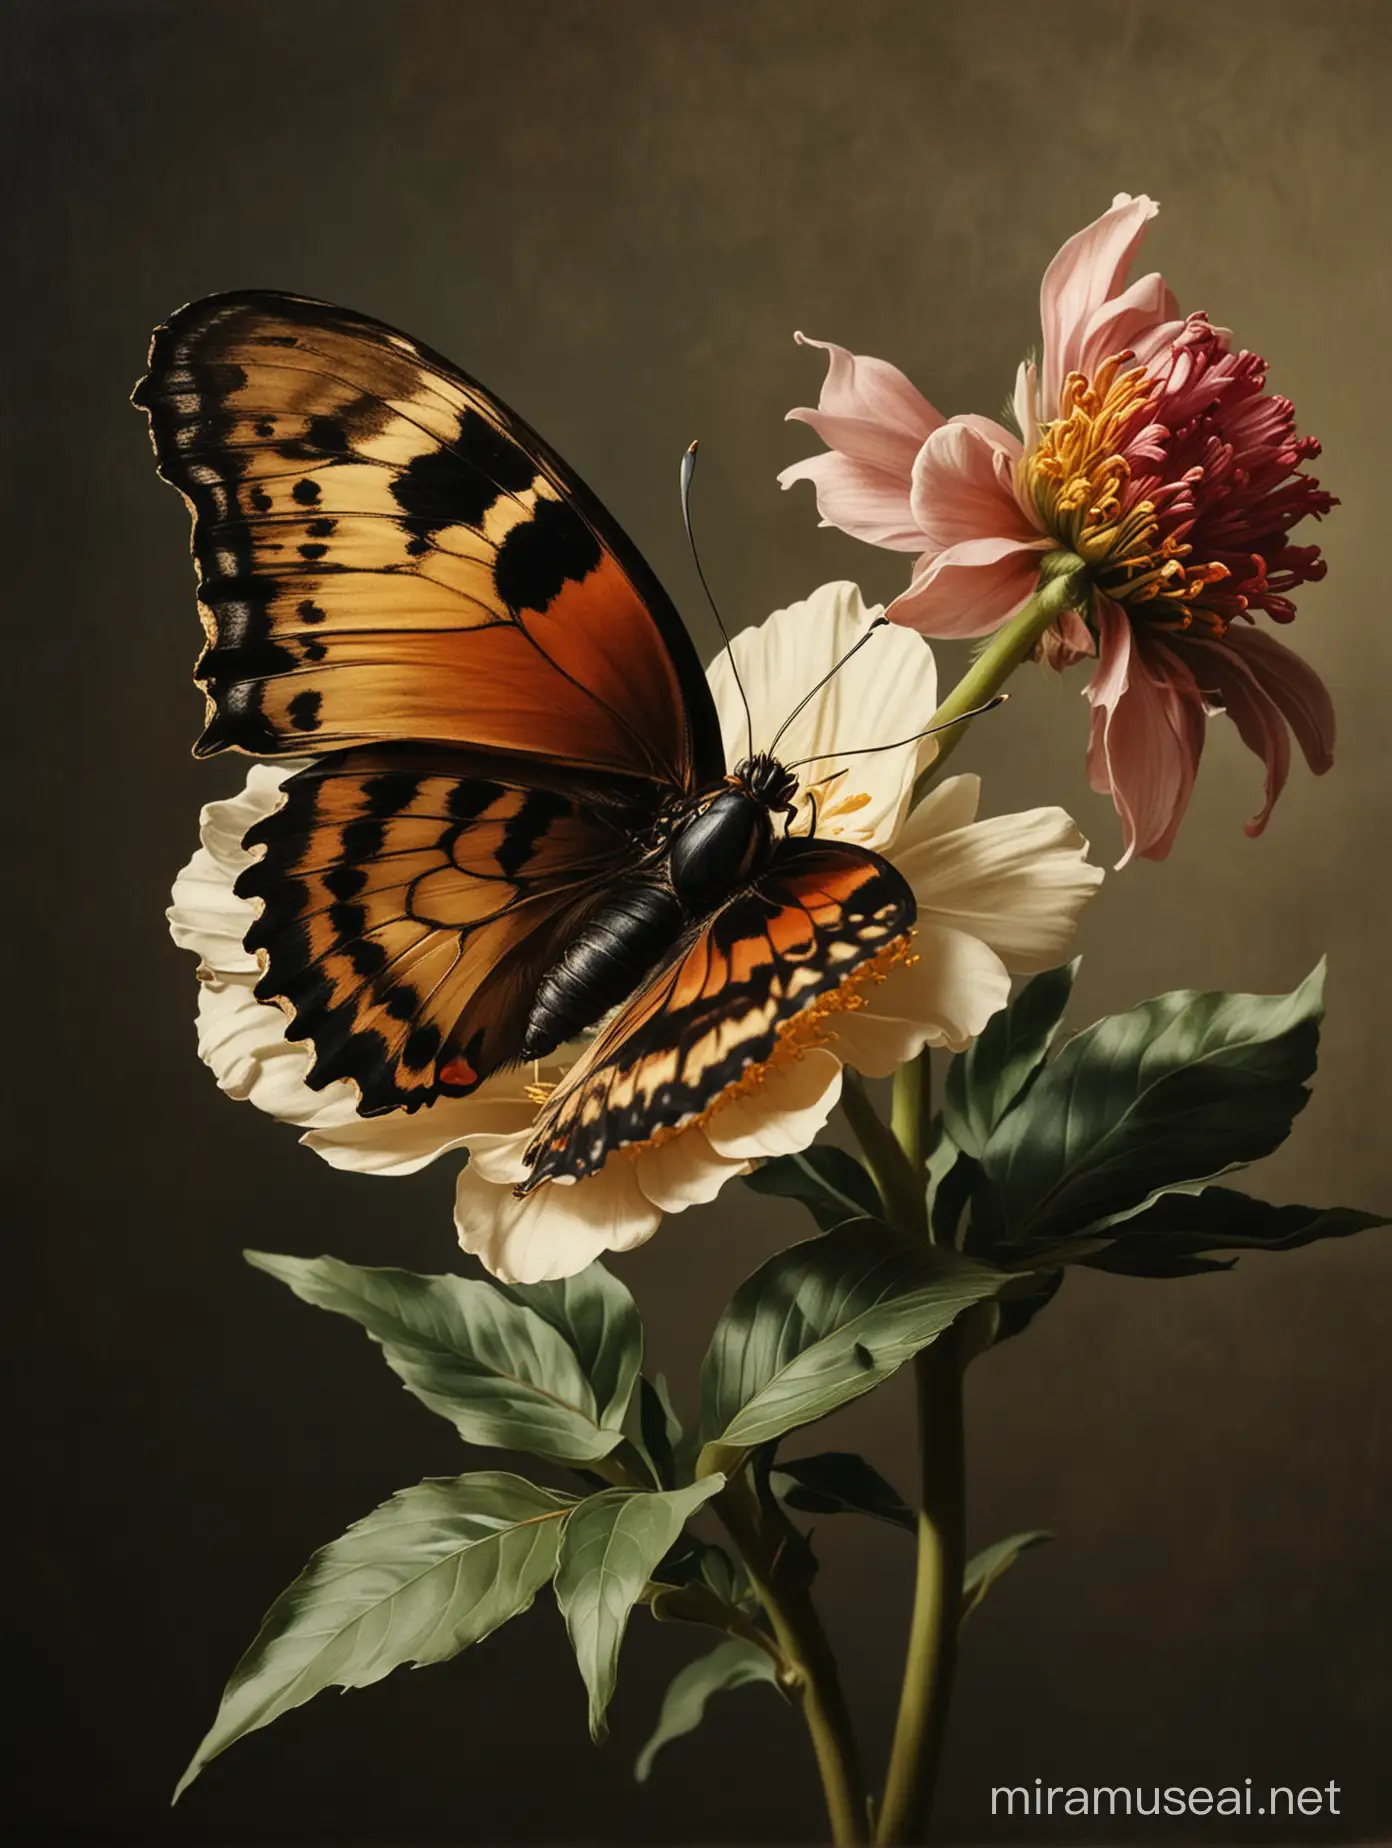 Butterly flying to a flower in the style of 1600 century painter Caravaggio.